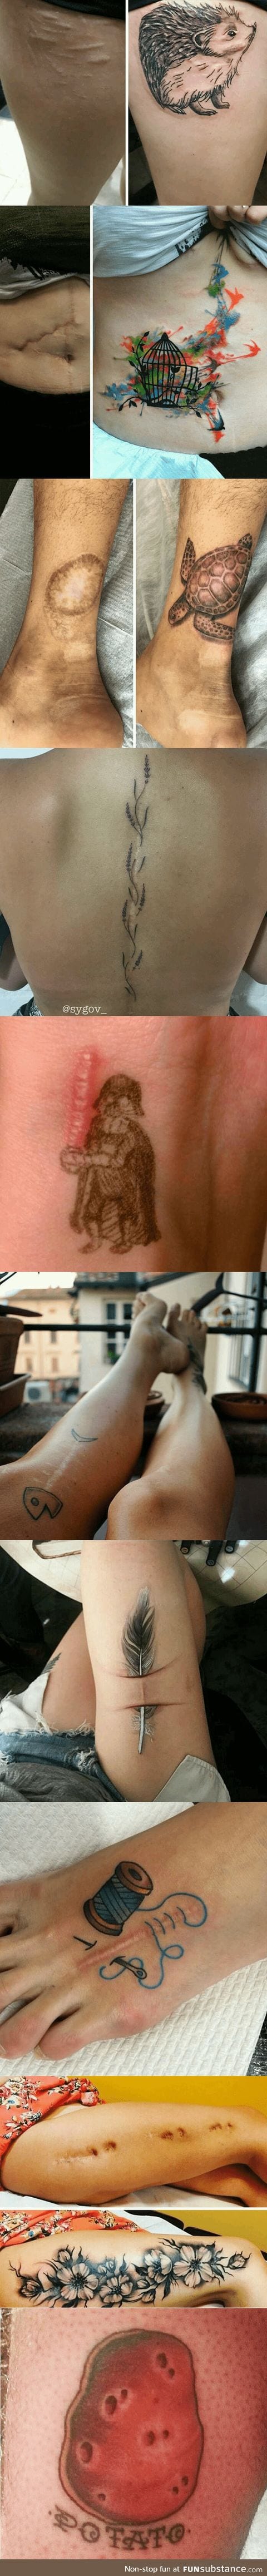 Amazing tattoos that turn scars into Works of Art